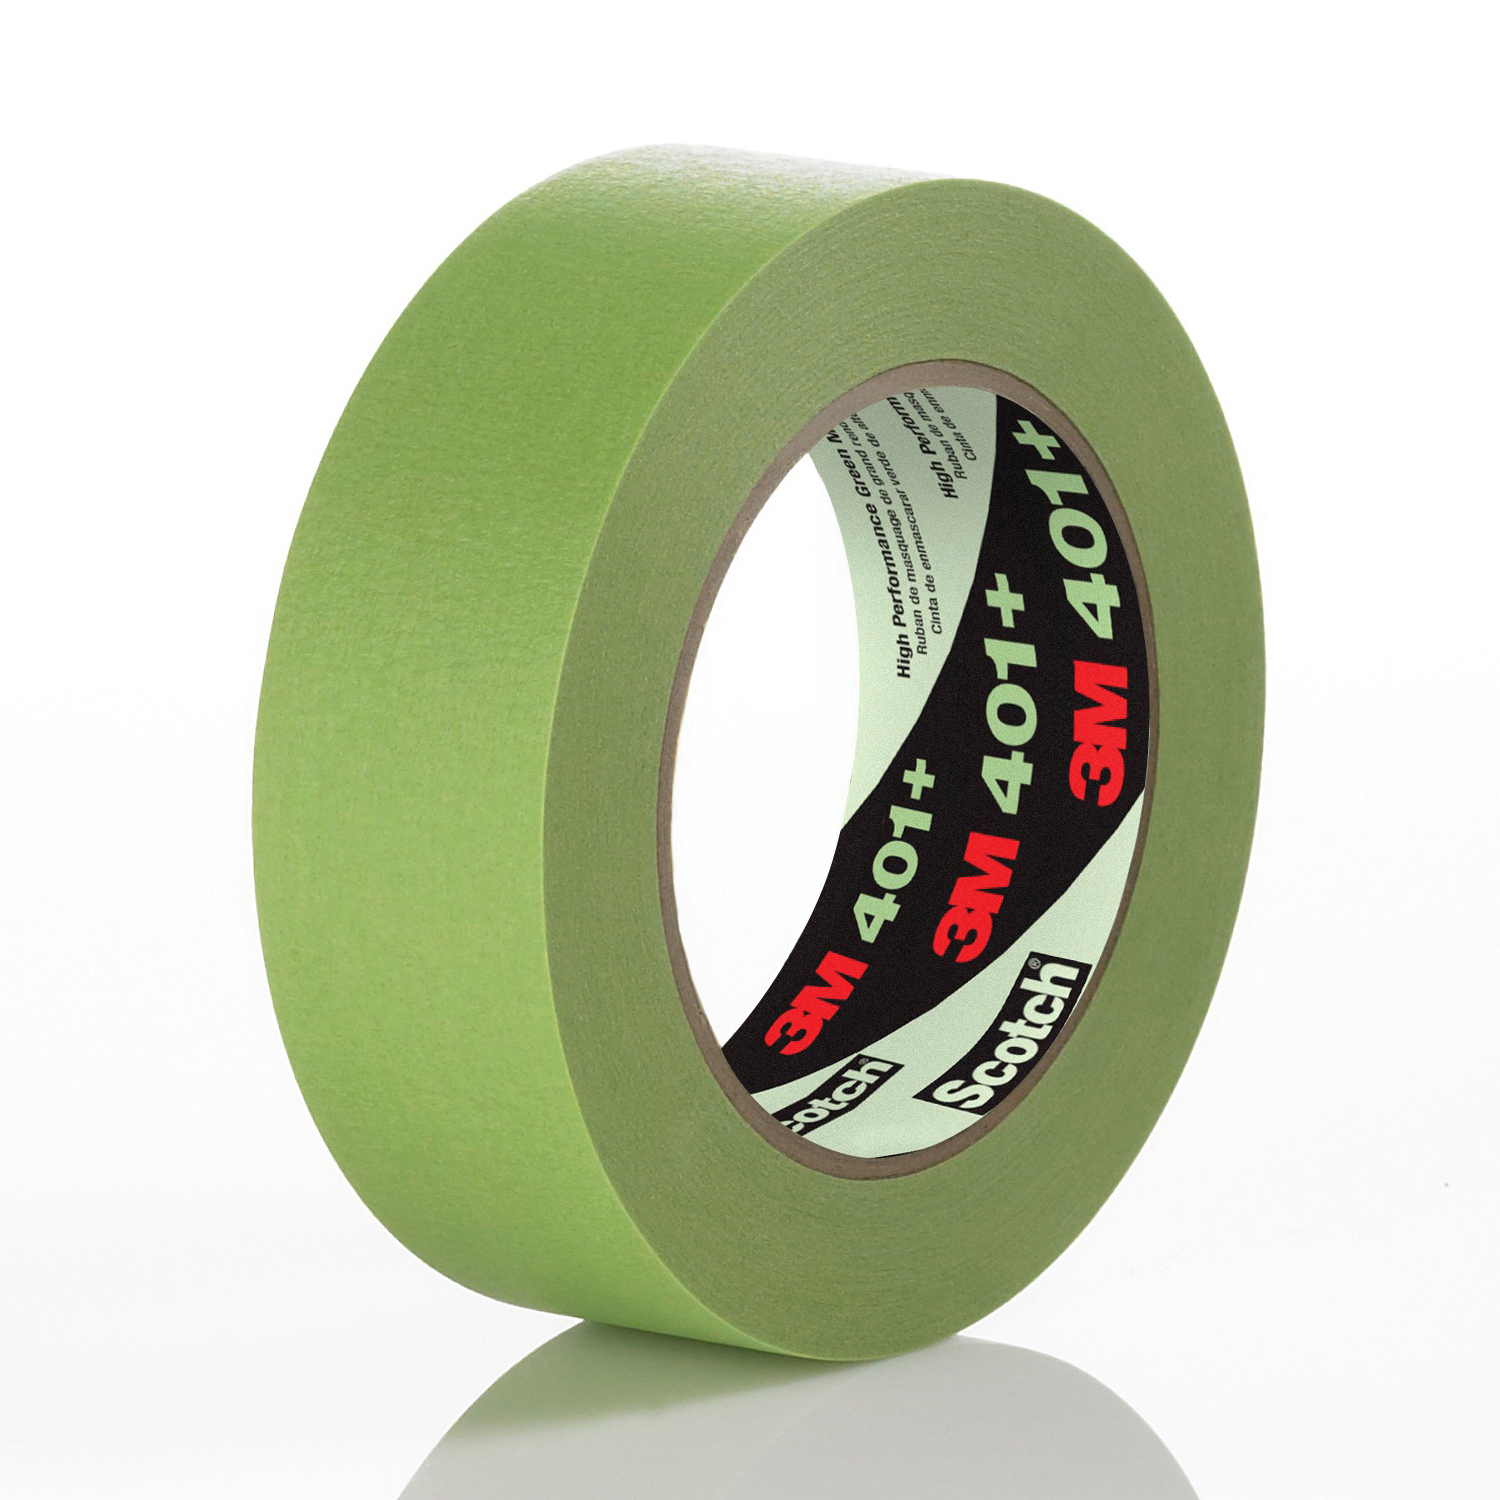 3M™ 051115-64763 High Performance Masking Tape, 55 m L x 48 mm W, 6.7 mil THK, Natural/Synthetic Rubber Adhesive, Crepe Paper Backing